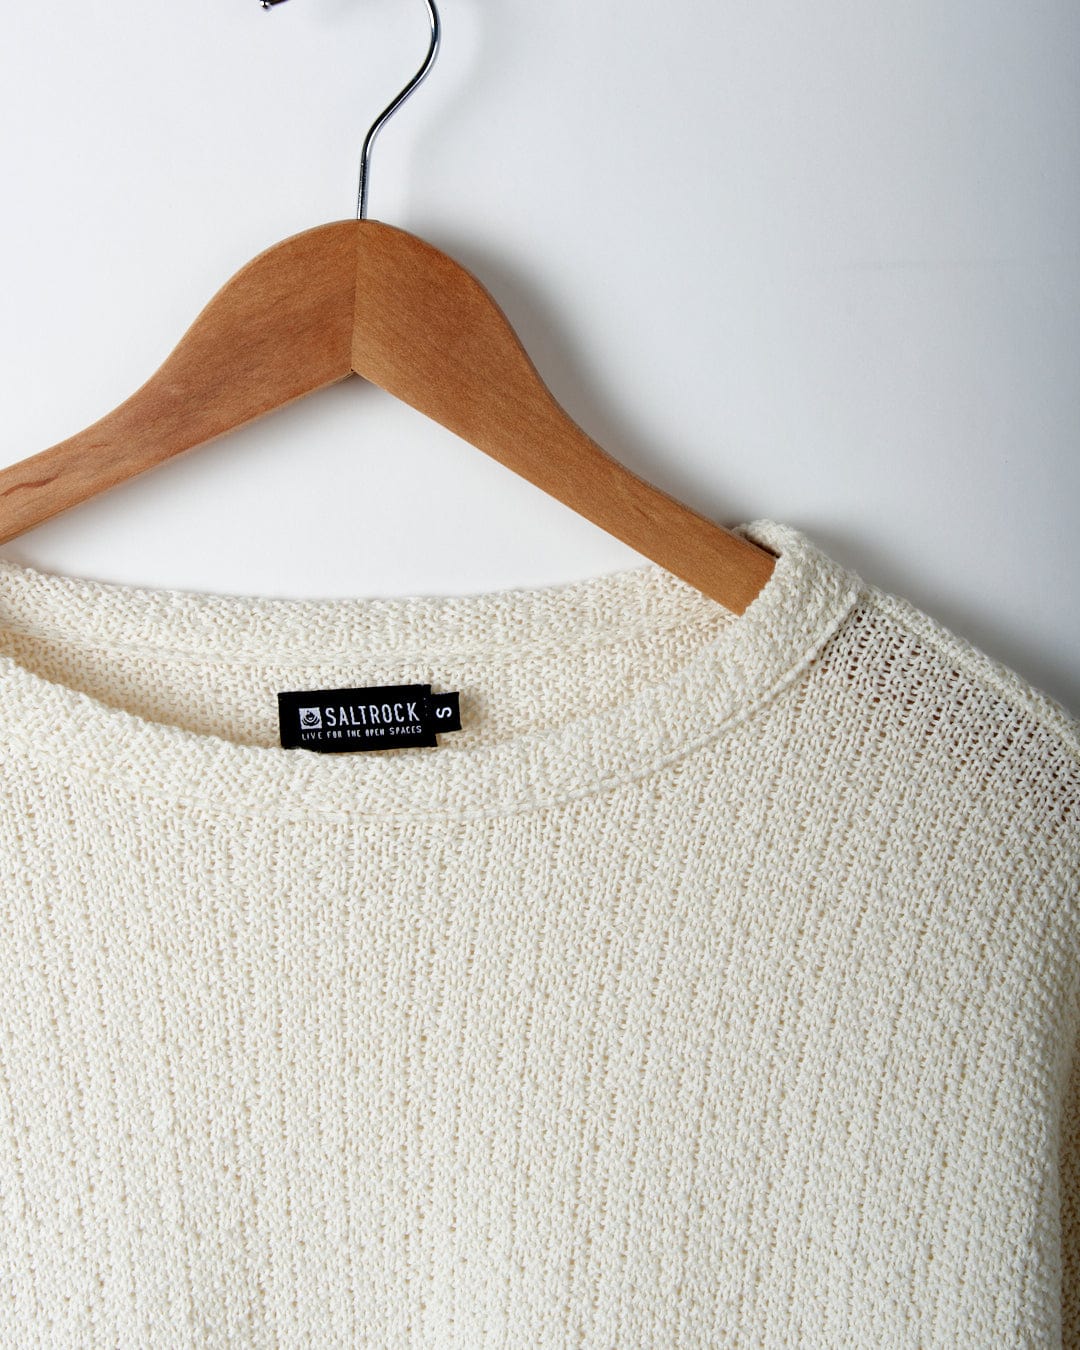 Beige textured knit sweater on a wooden hanger against a white background, with a visible brand label that reads "Saltrock".